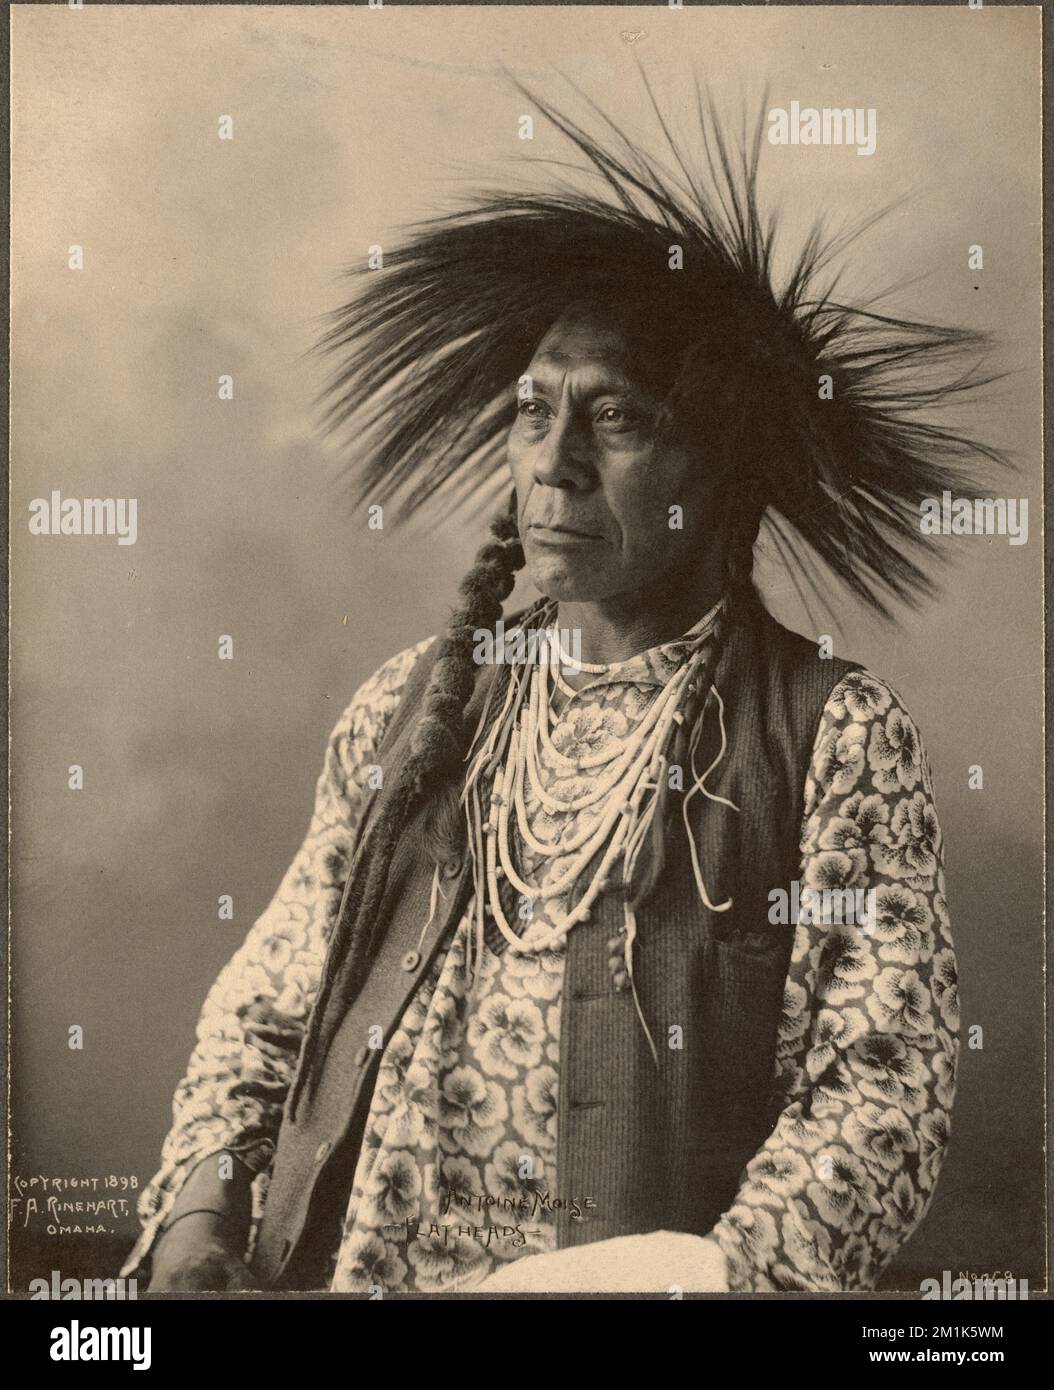 Antoine Moise, Flathead , Indians of North America, Salish Indians, Trans-Mississippi and International Exposition 1898 : Omaha, Neb.. Photographs of the American West Stock Photo